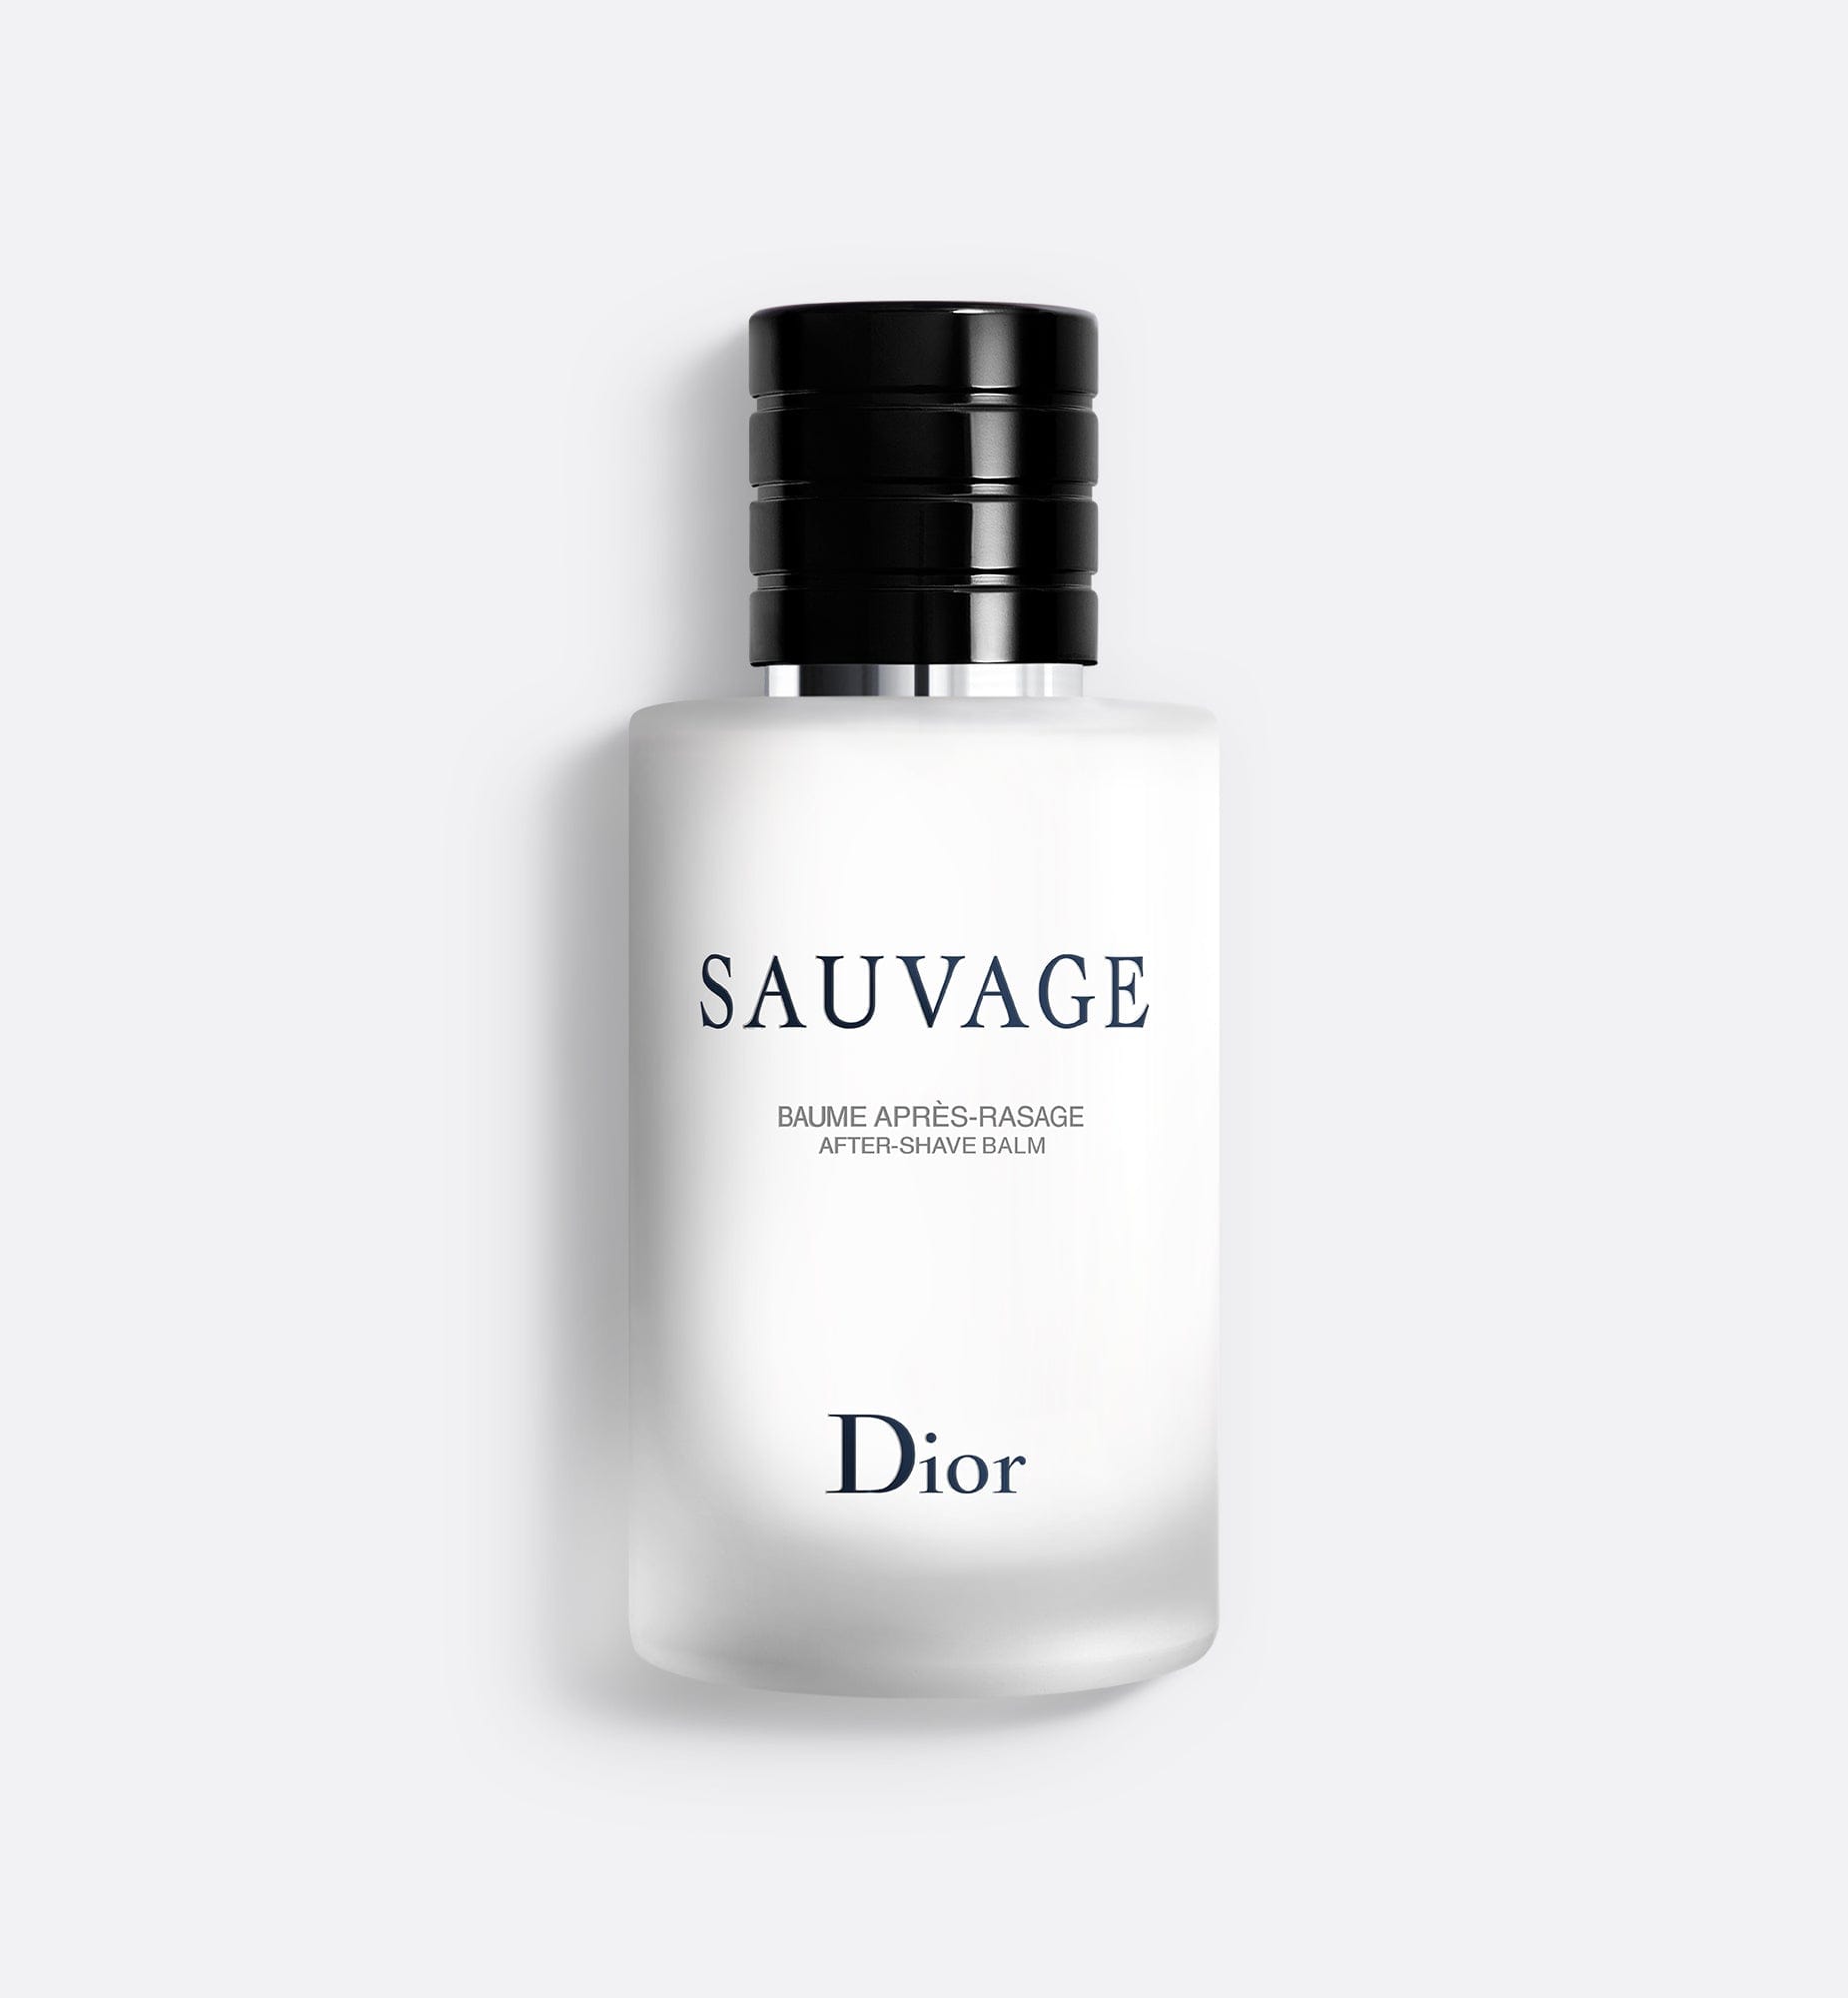 SAUVAGE | After-Shave Balm - Moisturizes and Soothes